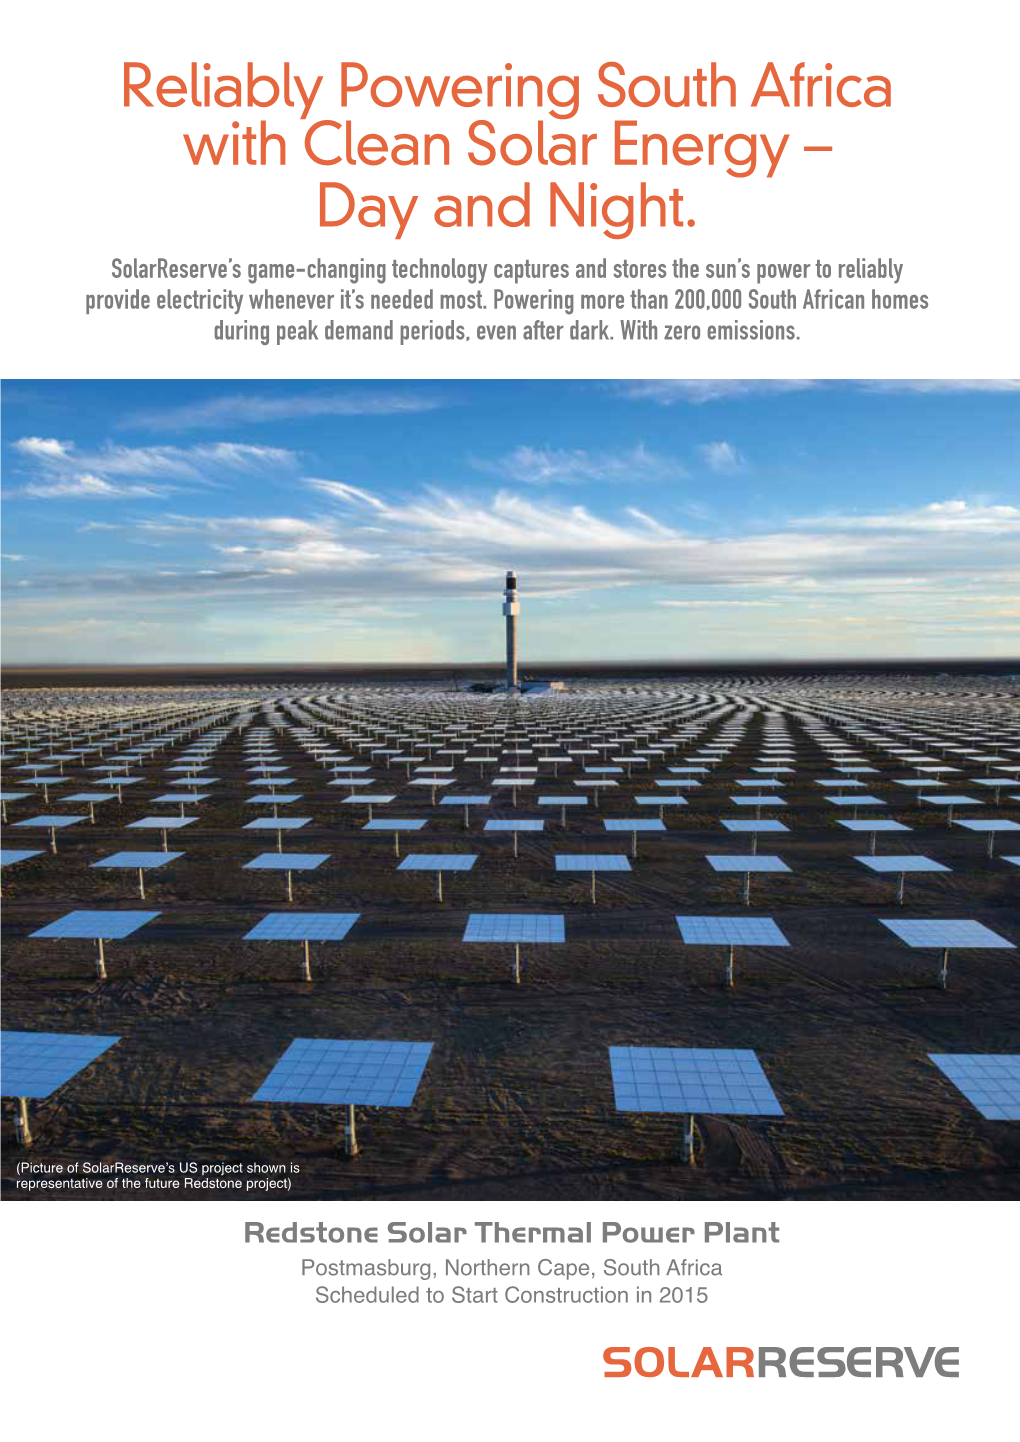 Reliably Powering South Africa with Clean Solar Energy – Day and Night